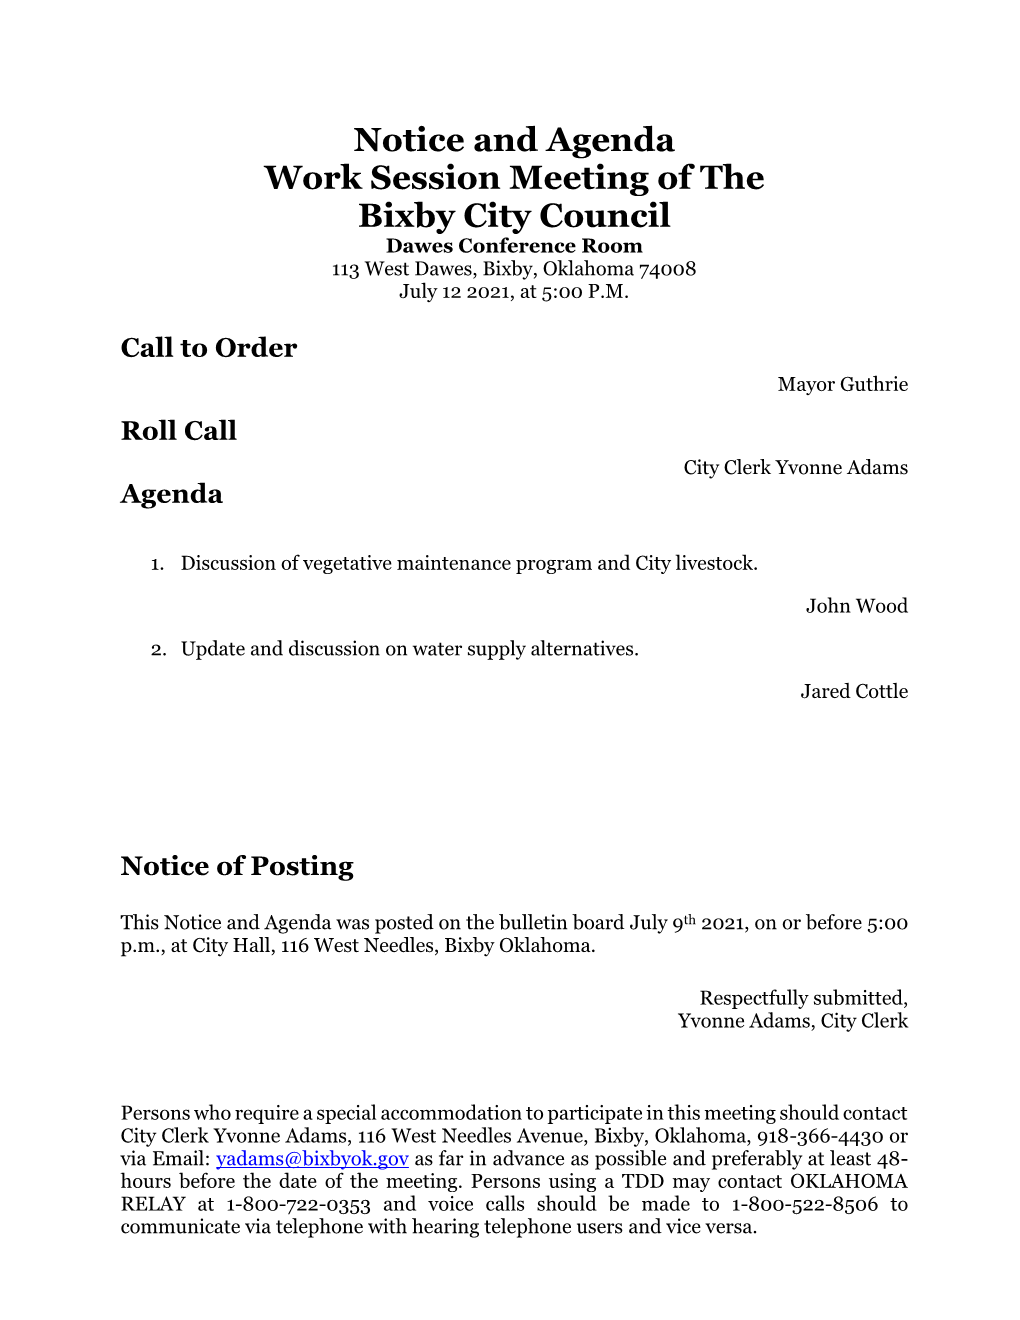 Notice and Agenda Work Session Meeting of the Bixby City Council Dawes Conference Room 113 West Dawes, Bixby, Oklahoma 74008 July 12 2021, at 5:00 P.M